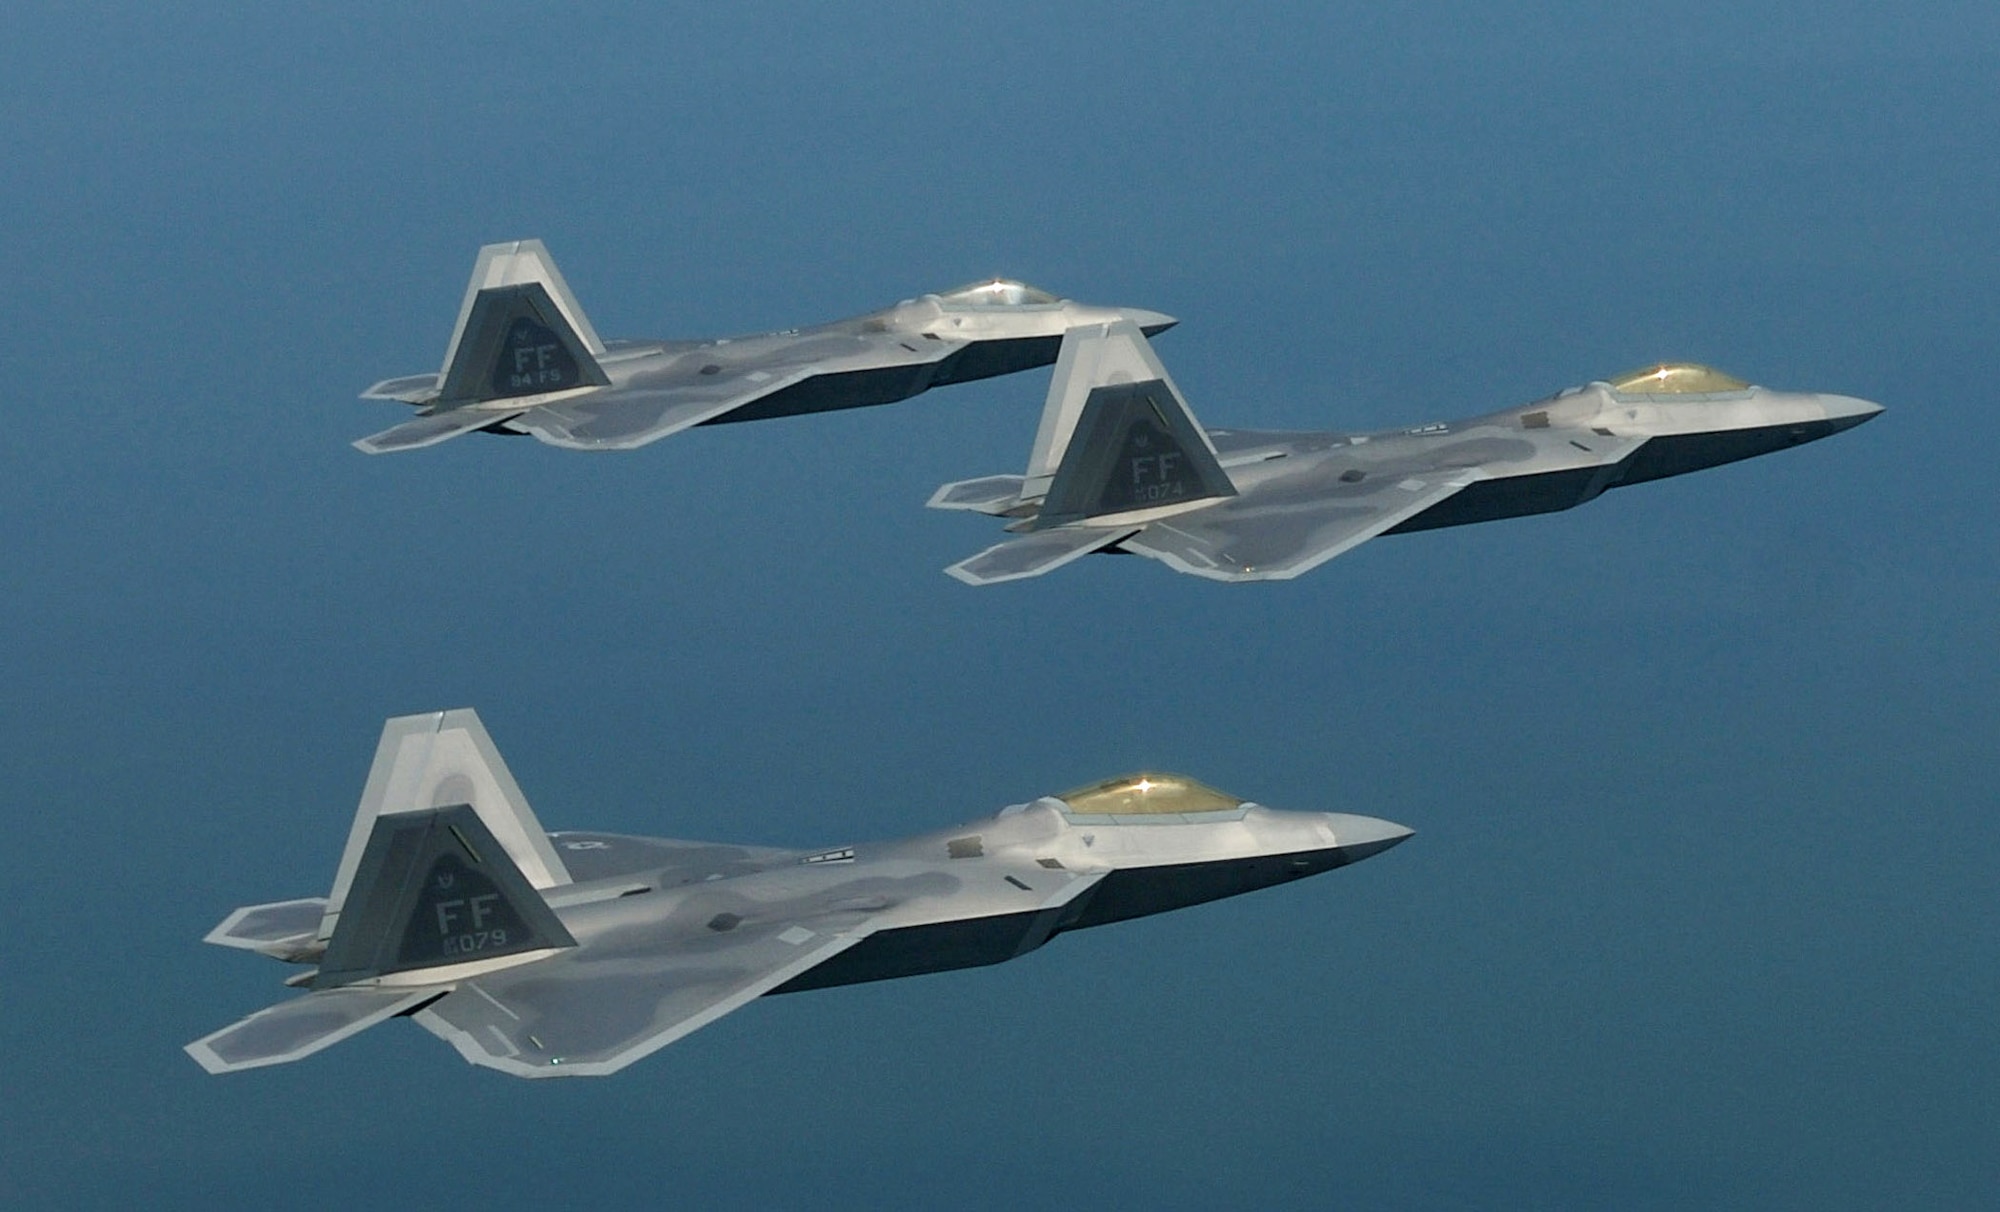 F-22 Raptors fly in formation. Lockheed Martin delivered the 100th F-22 to the Air Force Aug. 29 in Marietta, Ga., and the latest aircraft will be assigned to the 90th Fighter Squadron at Elmendorf Air Force Base, Alaska. (U.S. Air Force photo/Staff Sgt. Samuel Rogers)